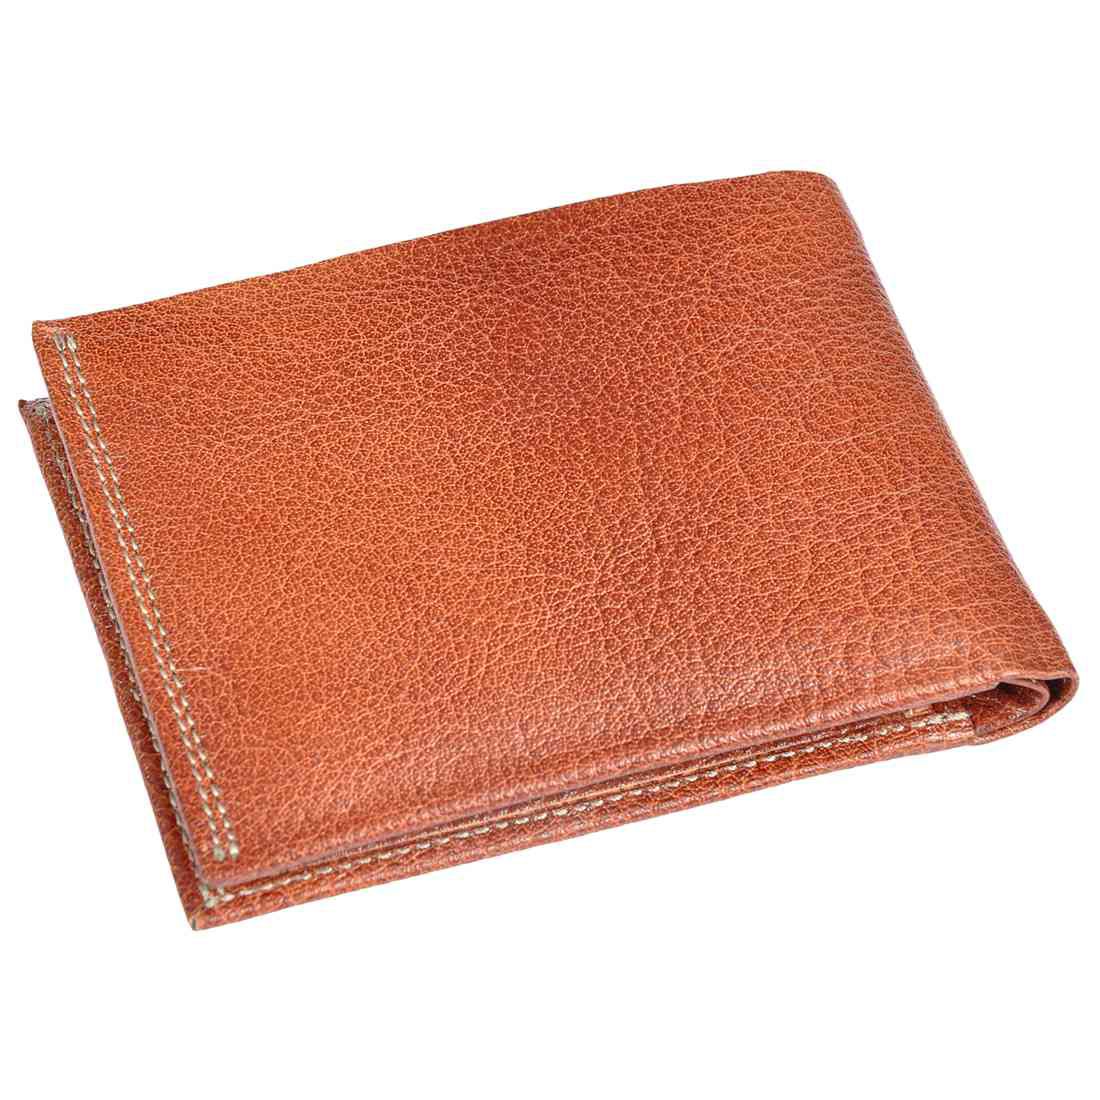 OHM New York Natural Grain Bill Fold Leather Wallet